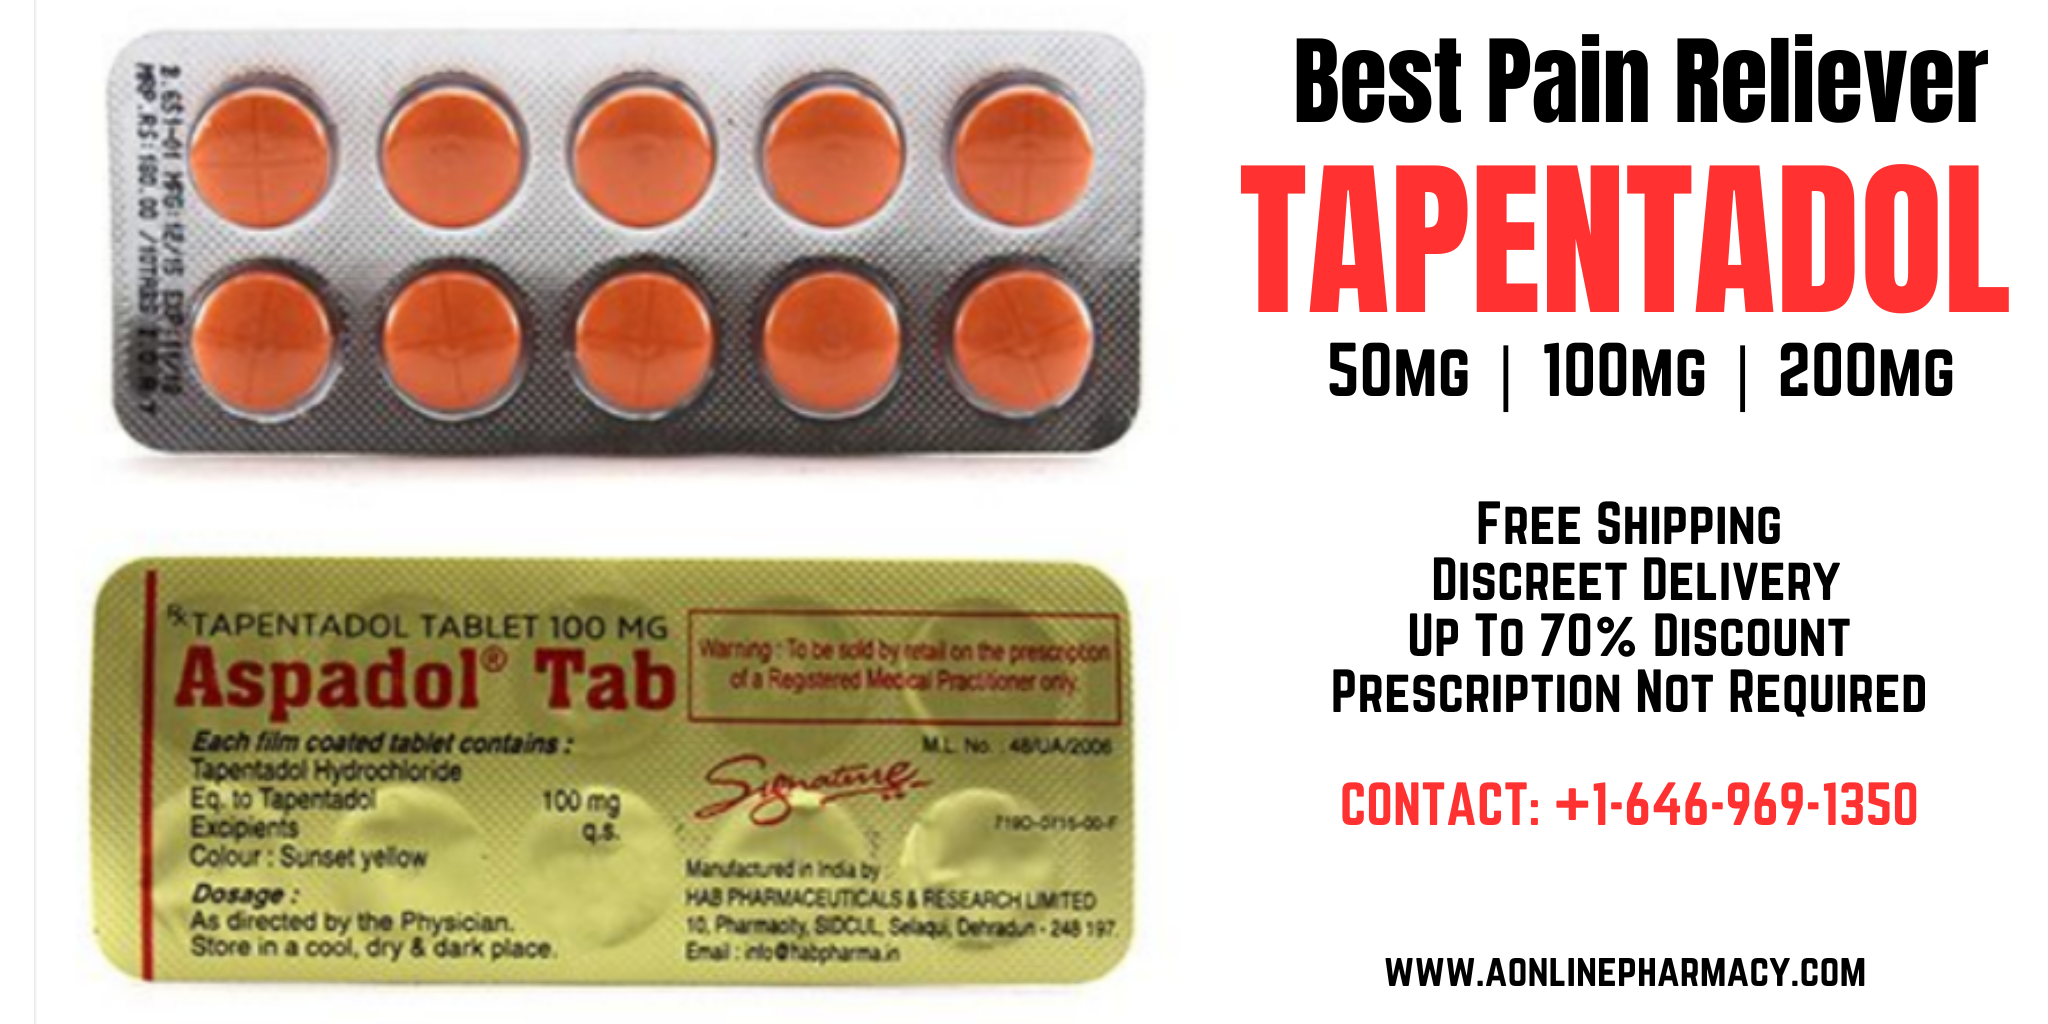 buy tapentadol 200mg online without prescription